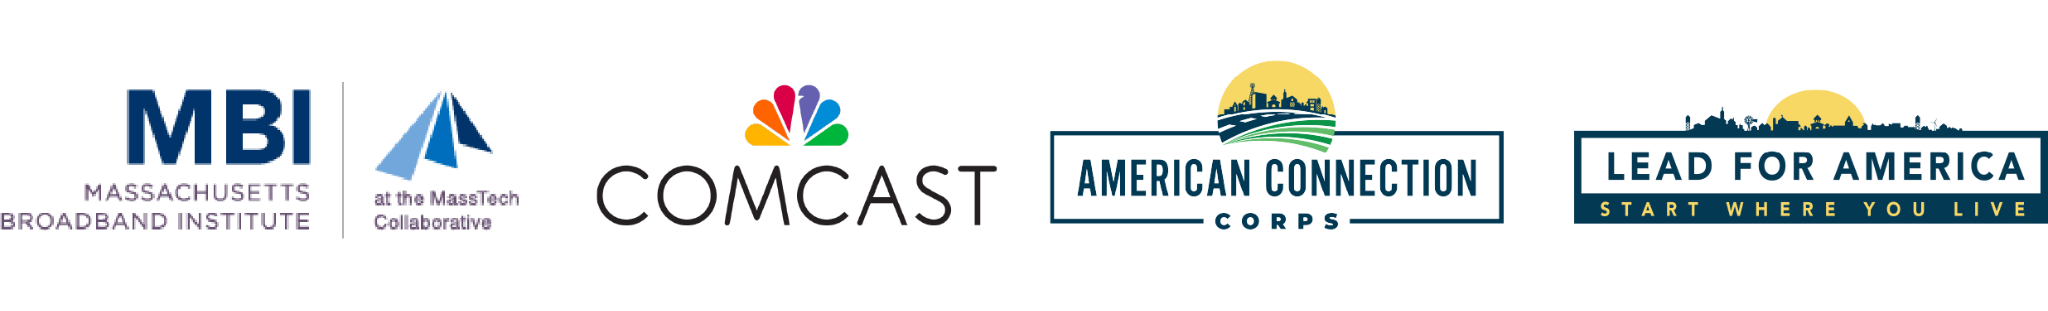 Logos for MBI, Comcast, American Connection Corps, and Lead for America